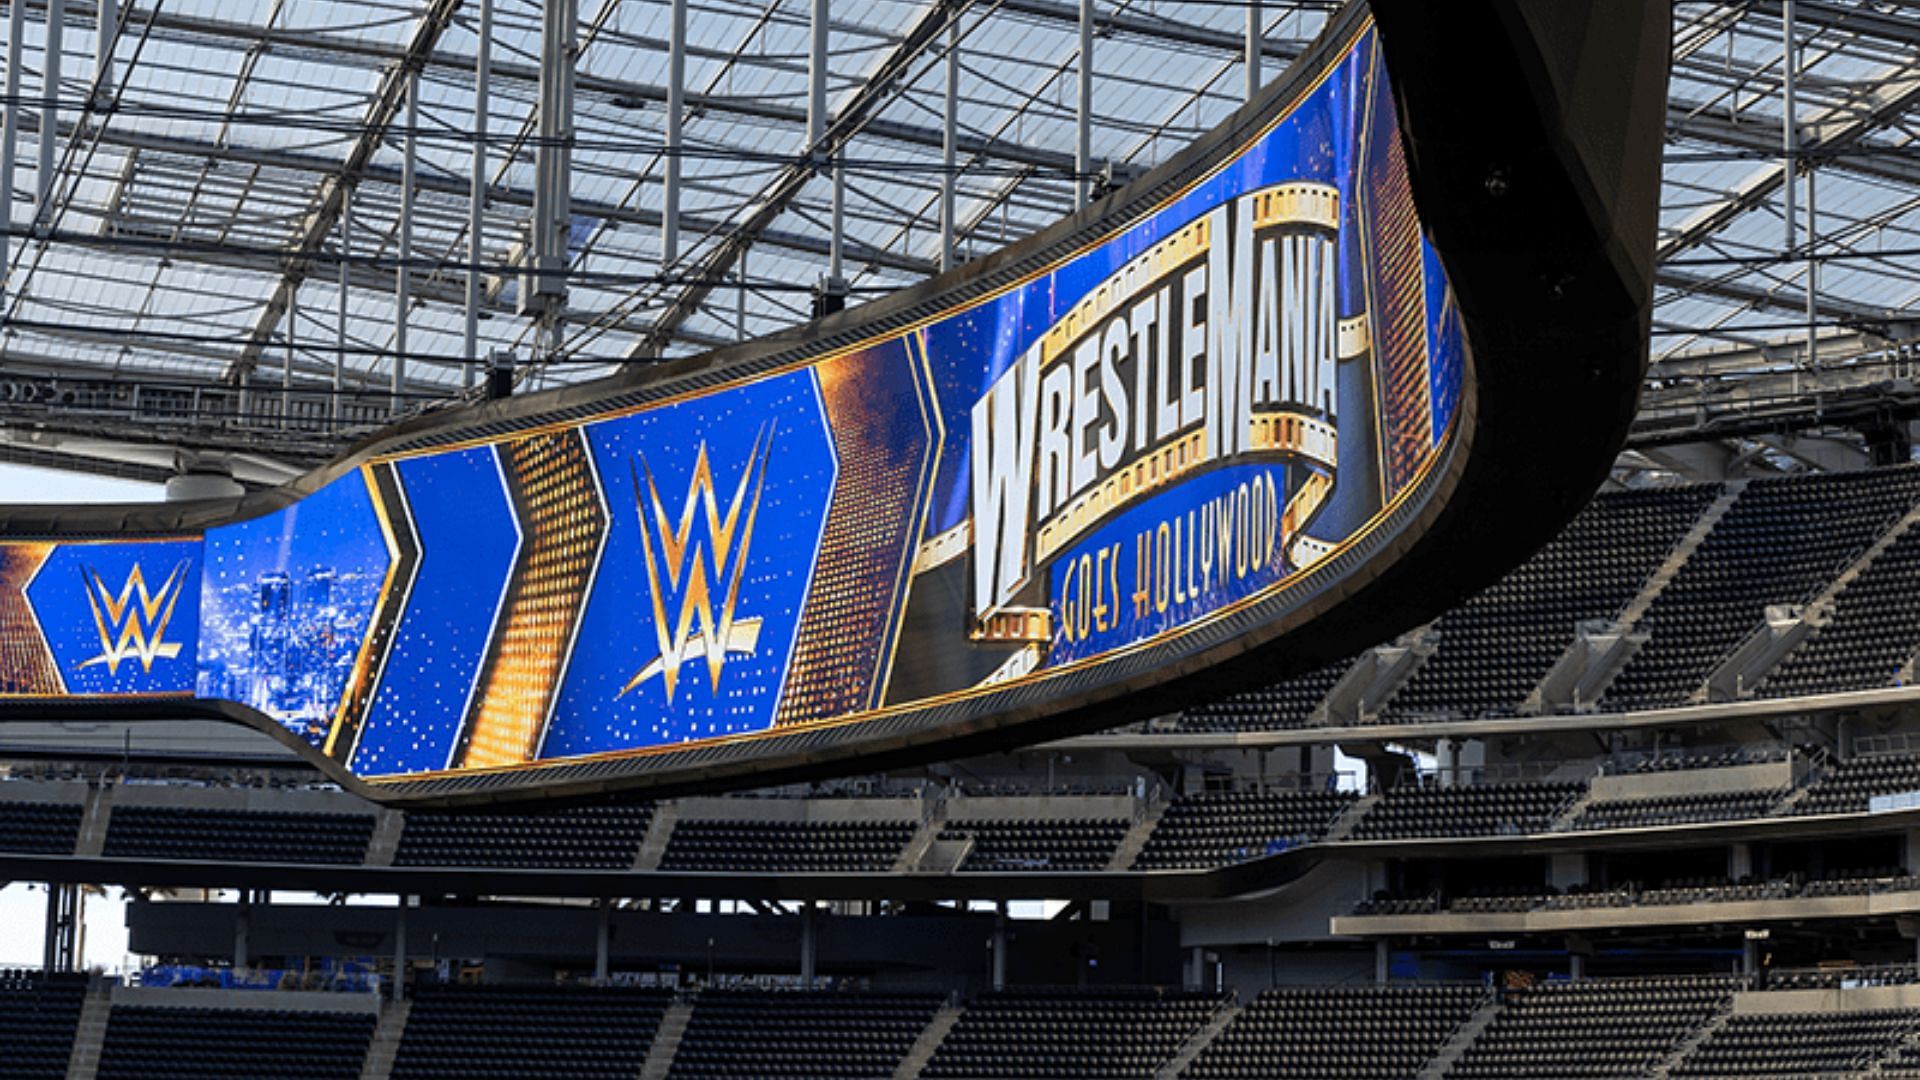 WrestleMania 39 takes place in Hollywood this year.